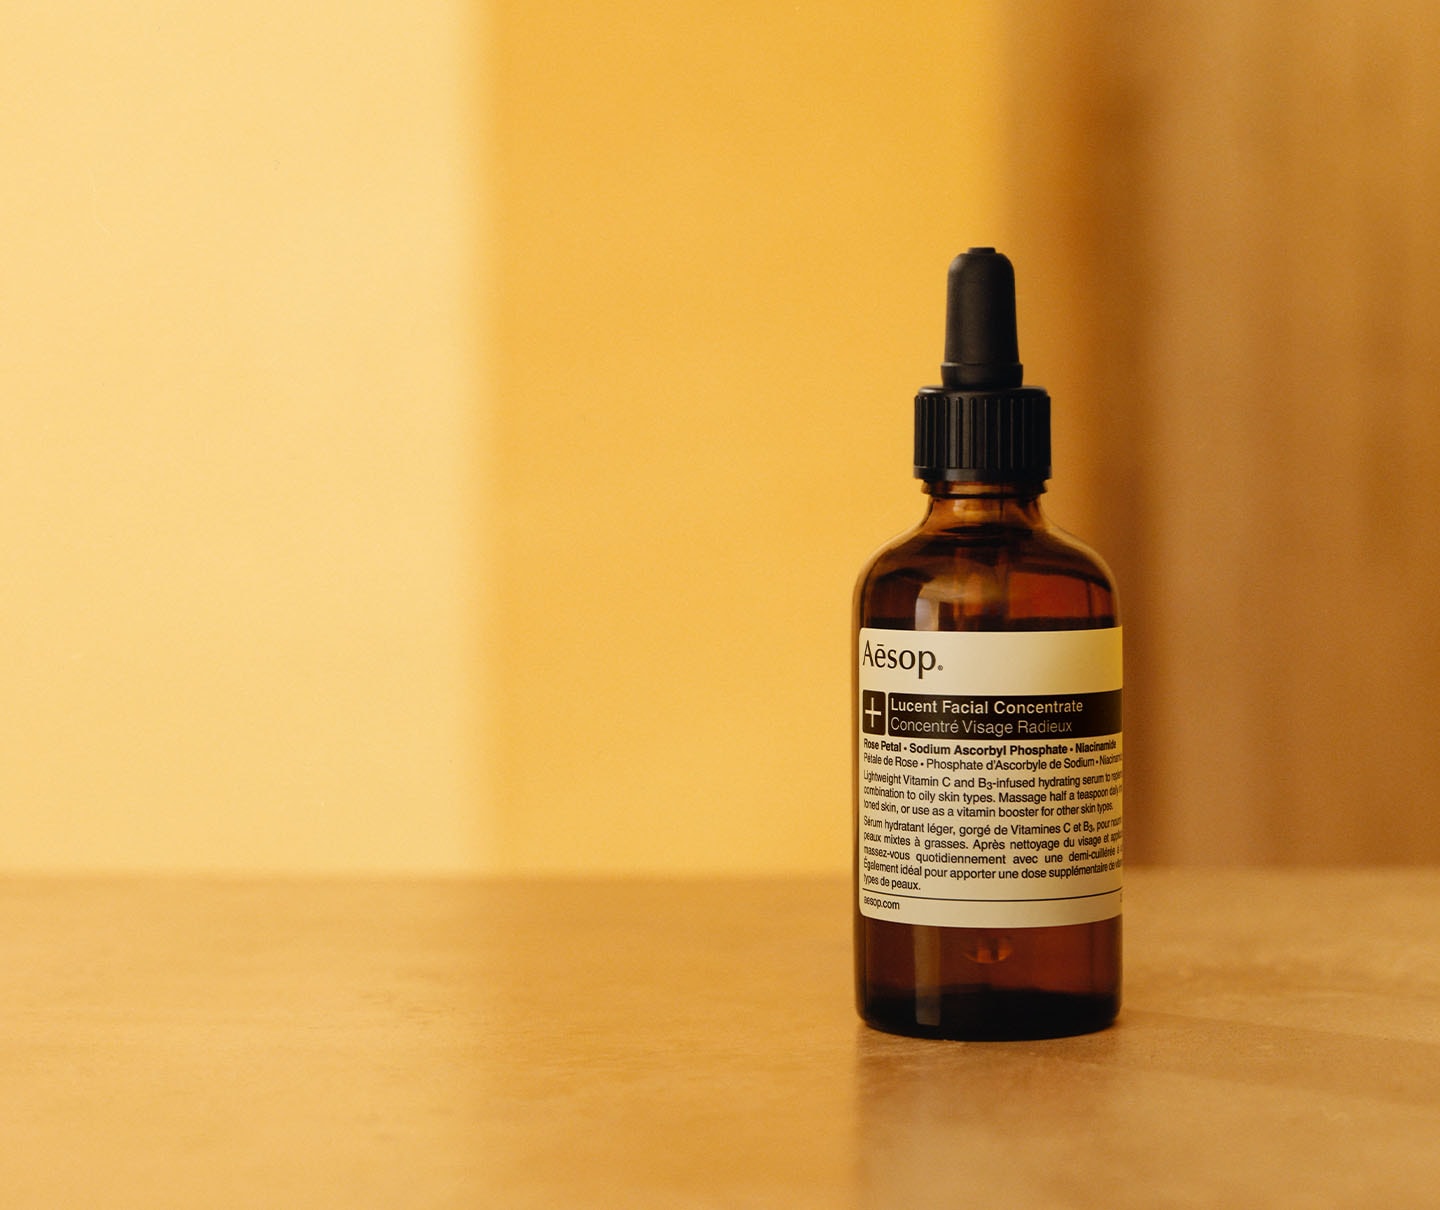 Lucent Facial Concentrate product in front of yellow fabric background.